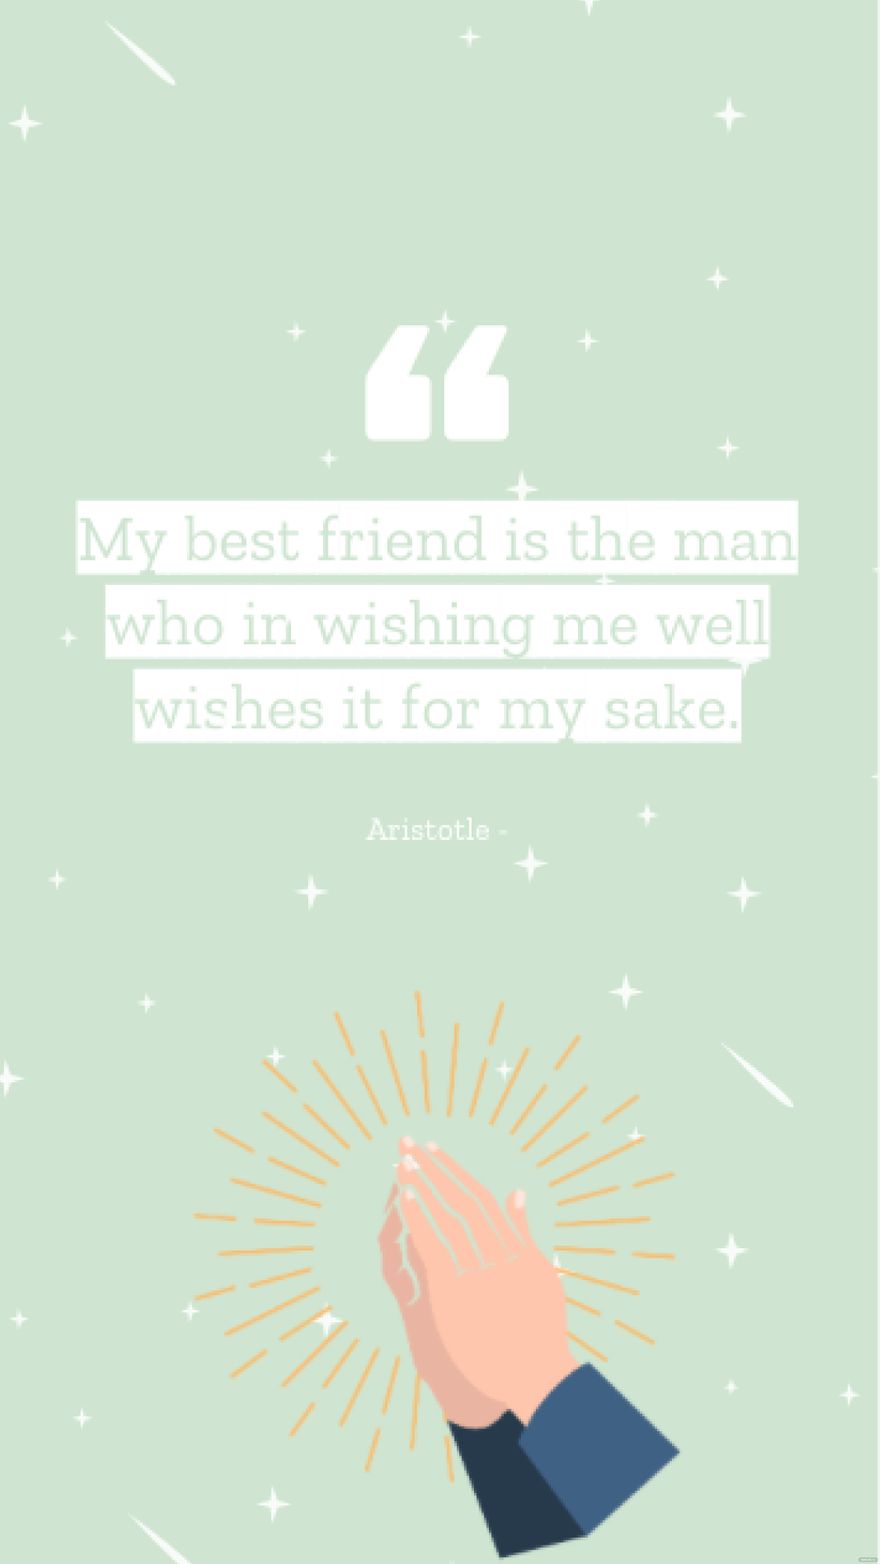 Aristotle - My best friend is the man who in wishing me well wishes it for my sake.